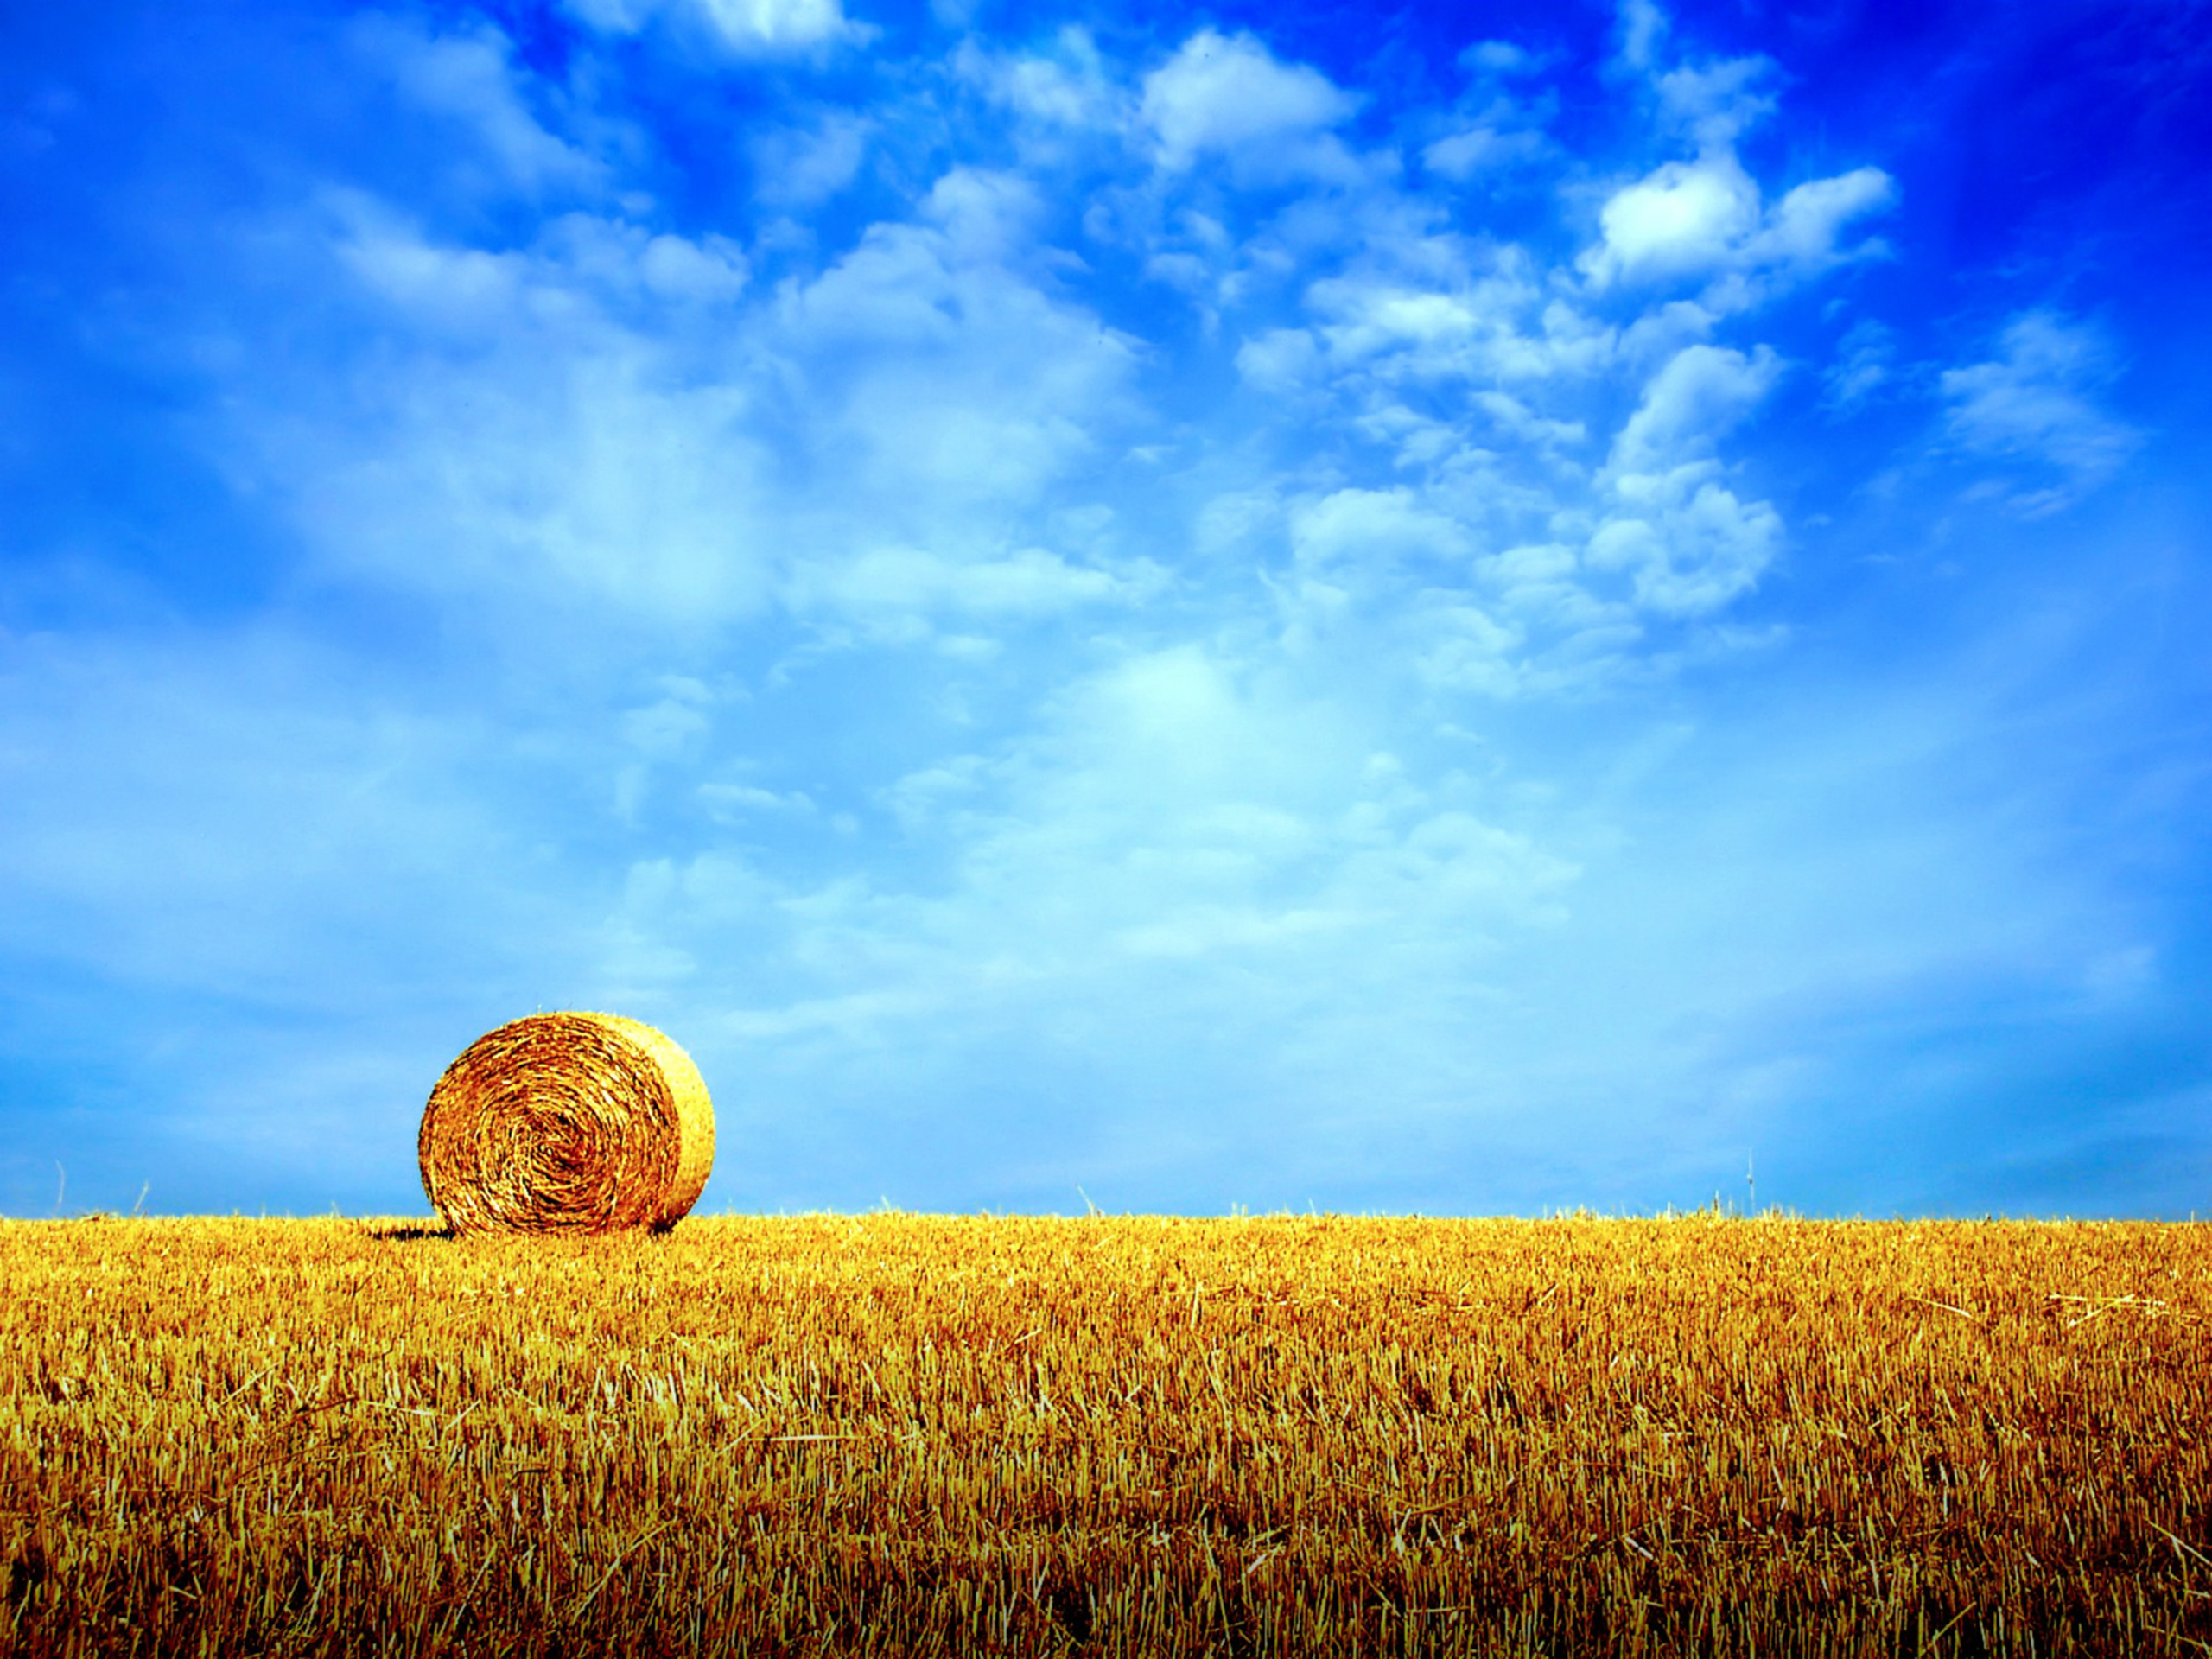 Nature And Summer Time - Hay Field - HD Wallpaper 